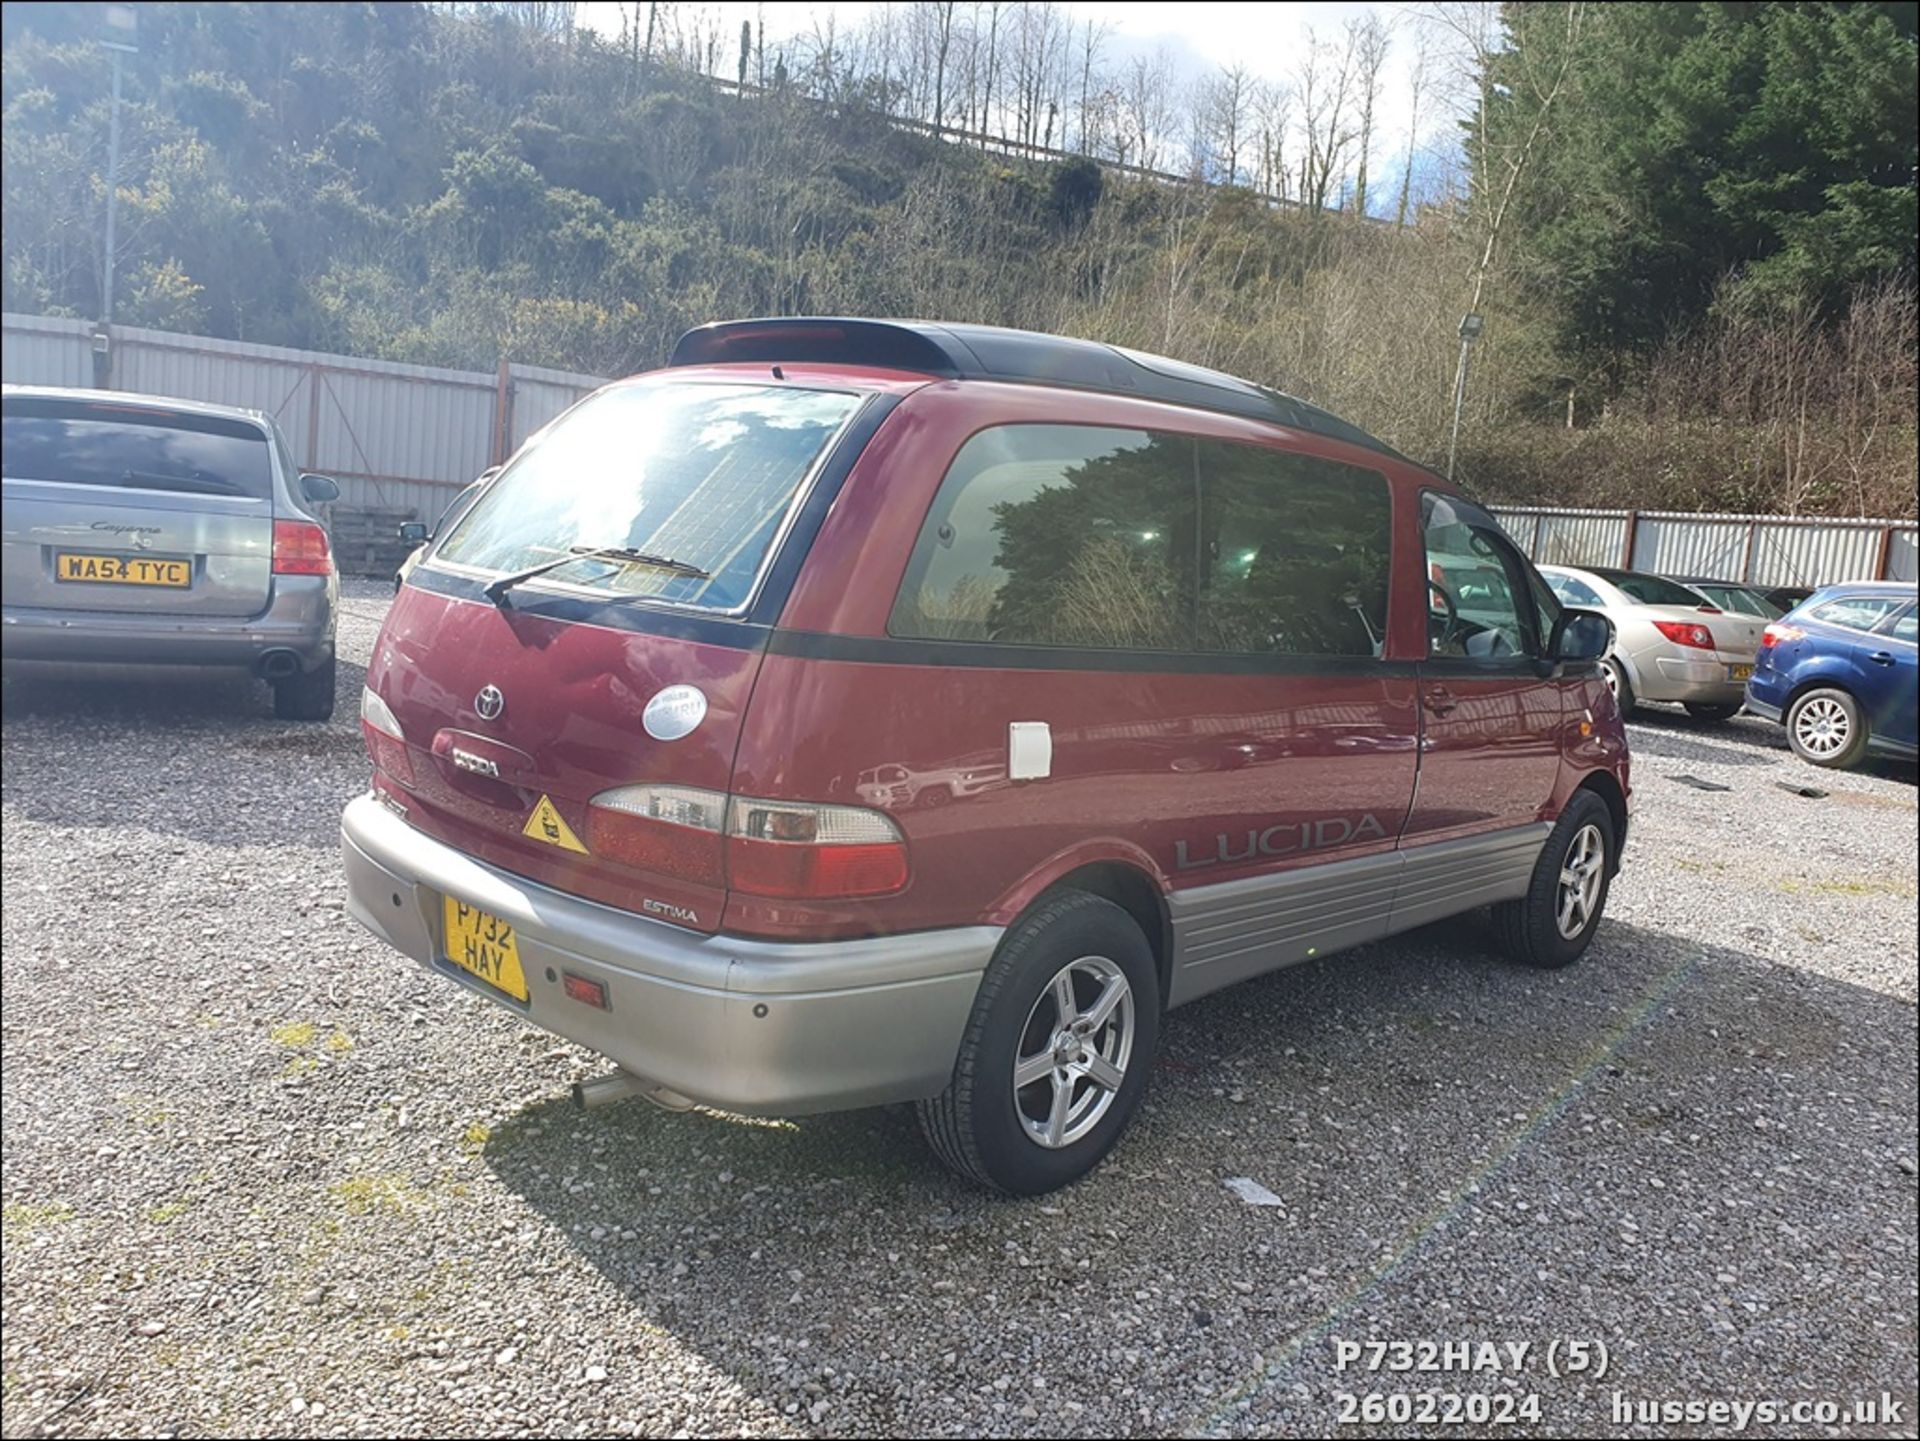 1997 TOYOTA LUCIDA - 2184cc 4dr Van (Red) - Image 6 of 22